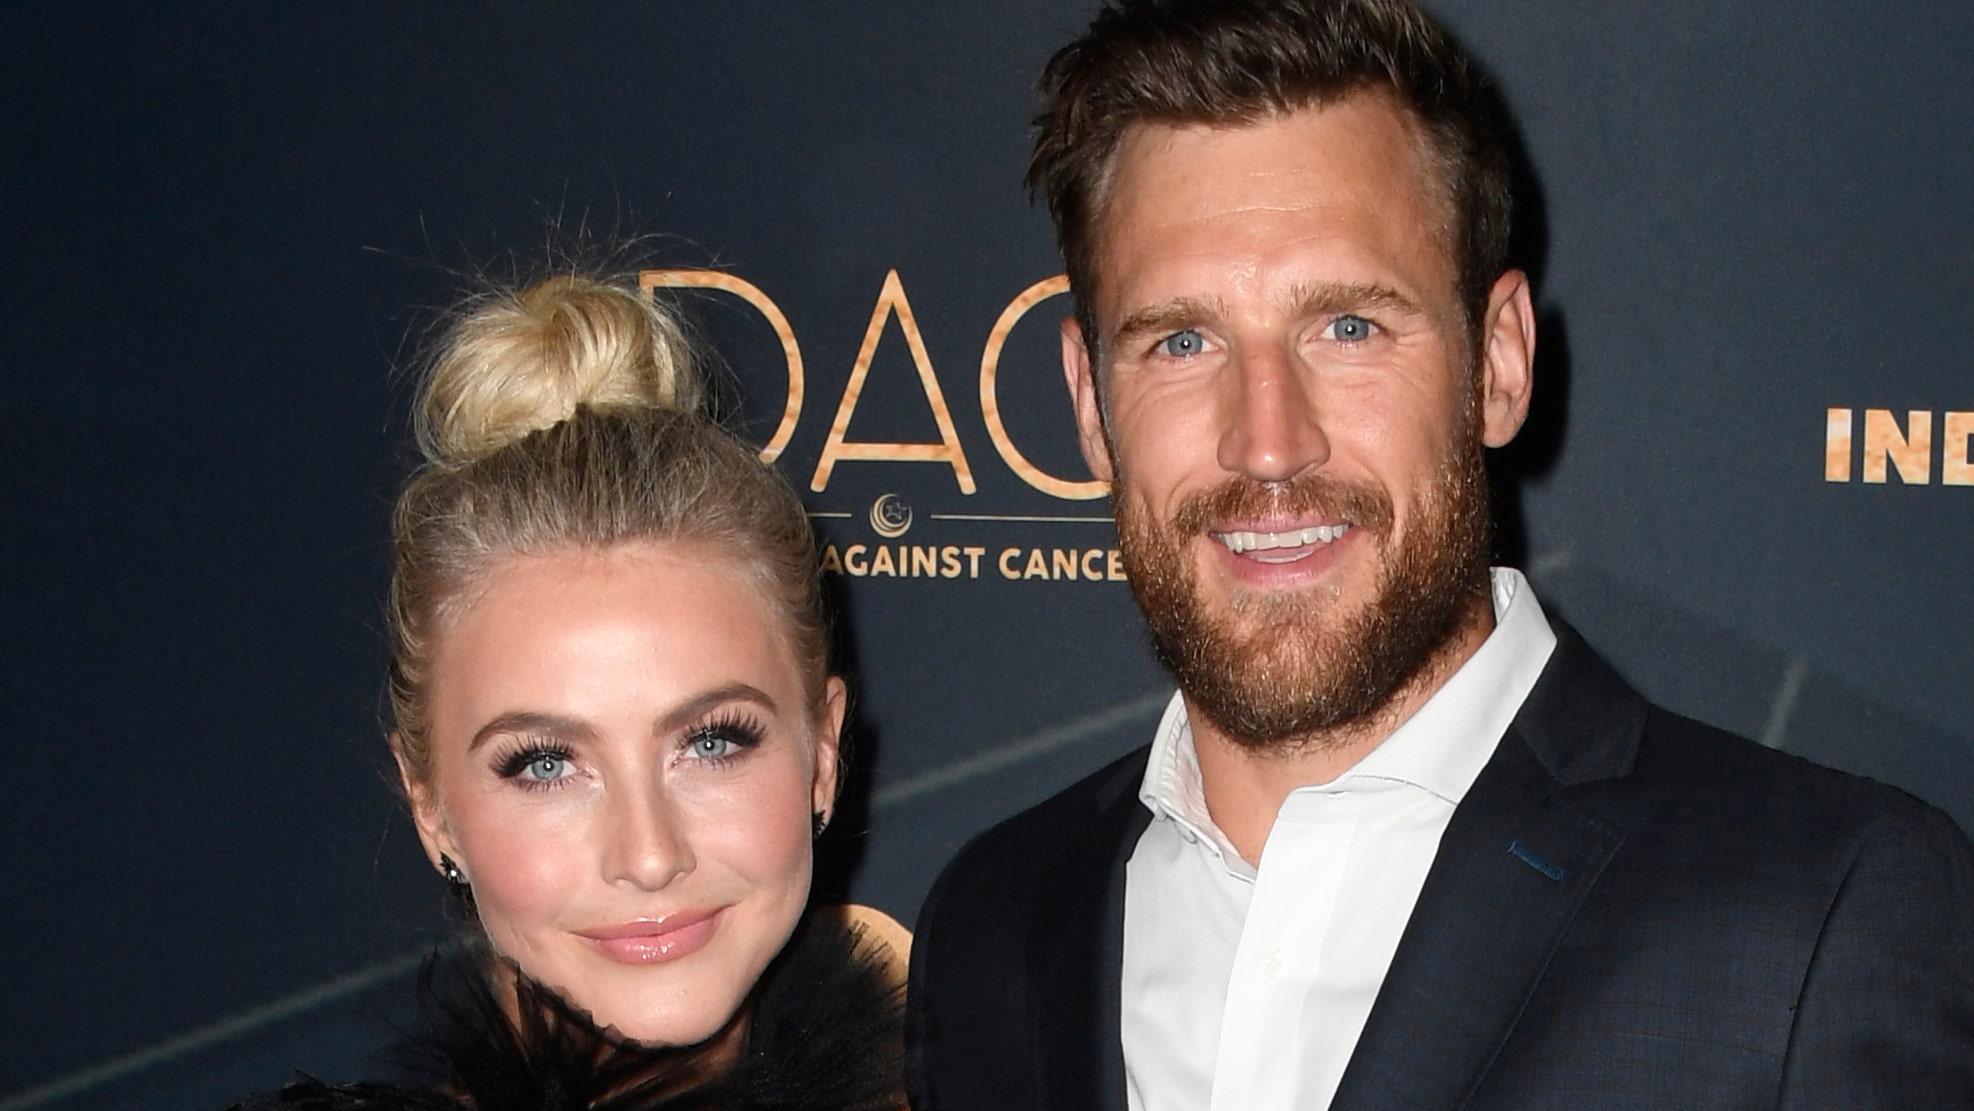 Julianne Hough shares message about feeling ‘stuck, depressed, anxious’ amid Brooks Laich divorce